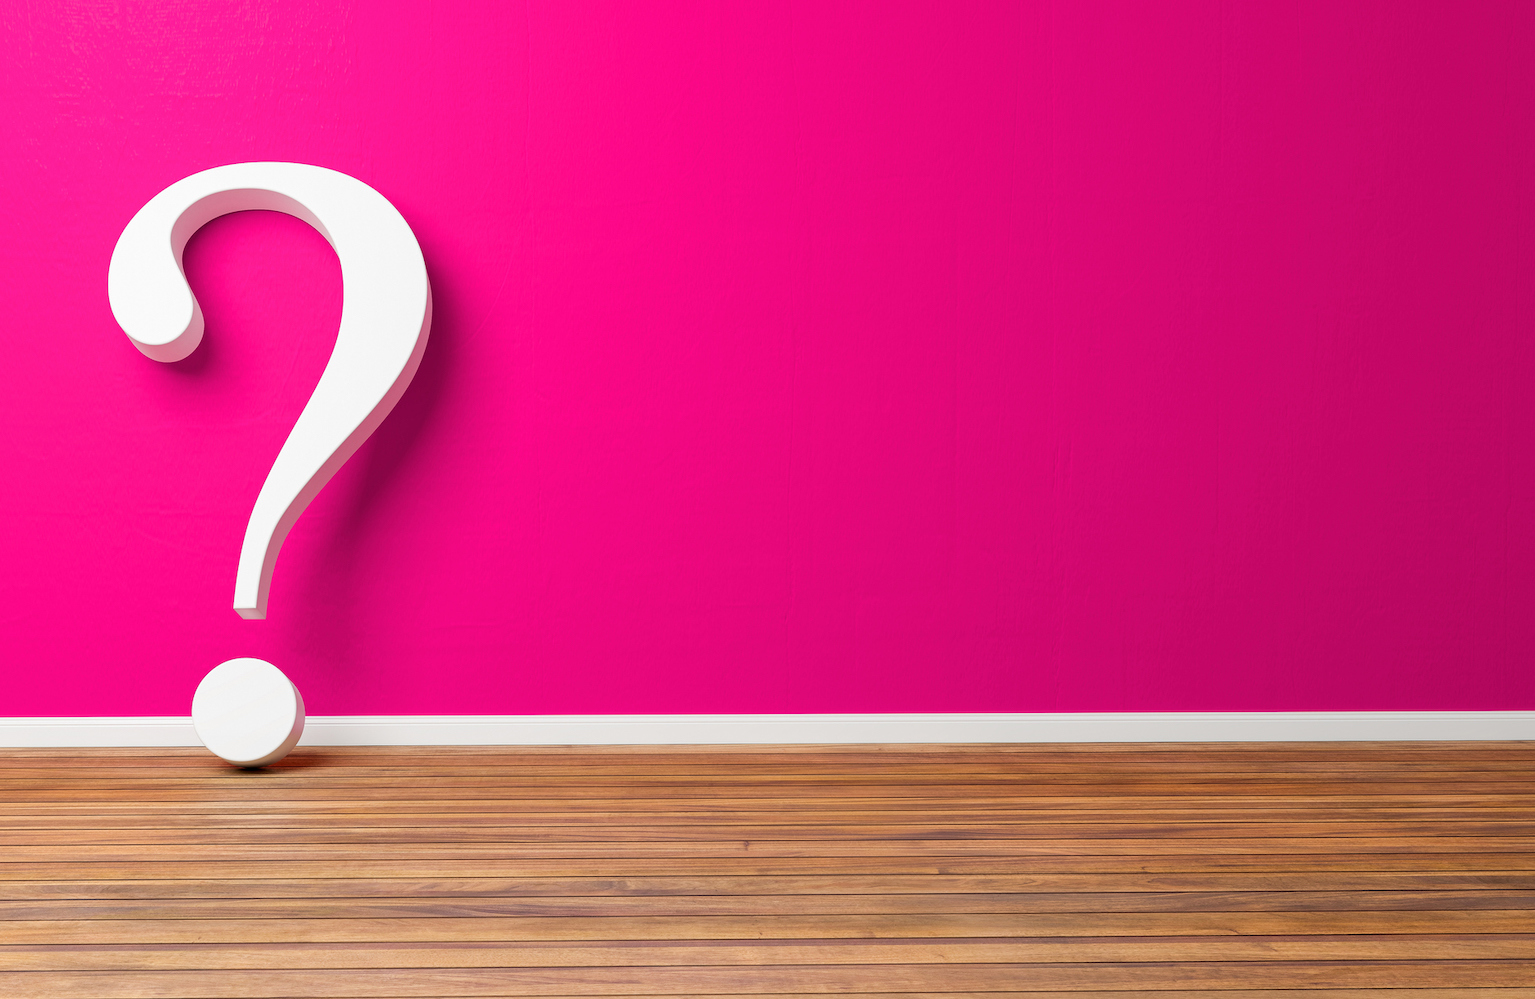 White question mark on pink concrete wall - 3D illustration